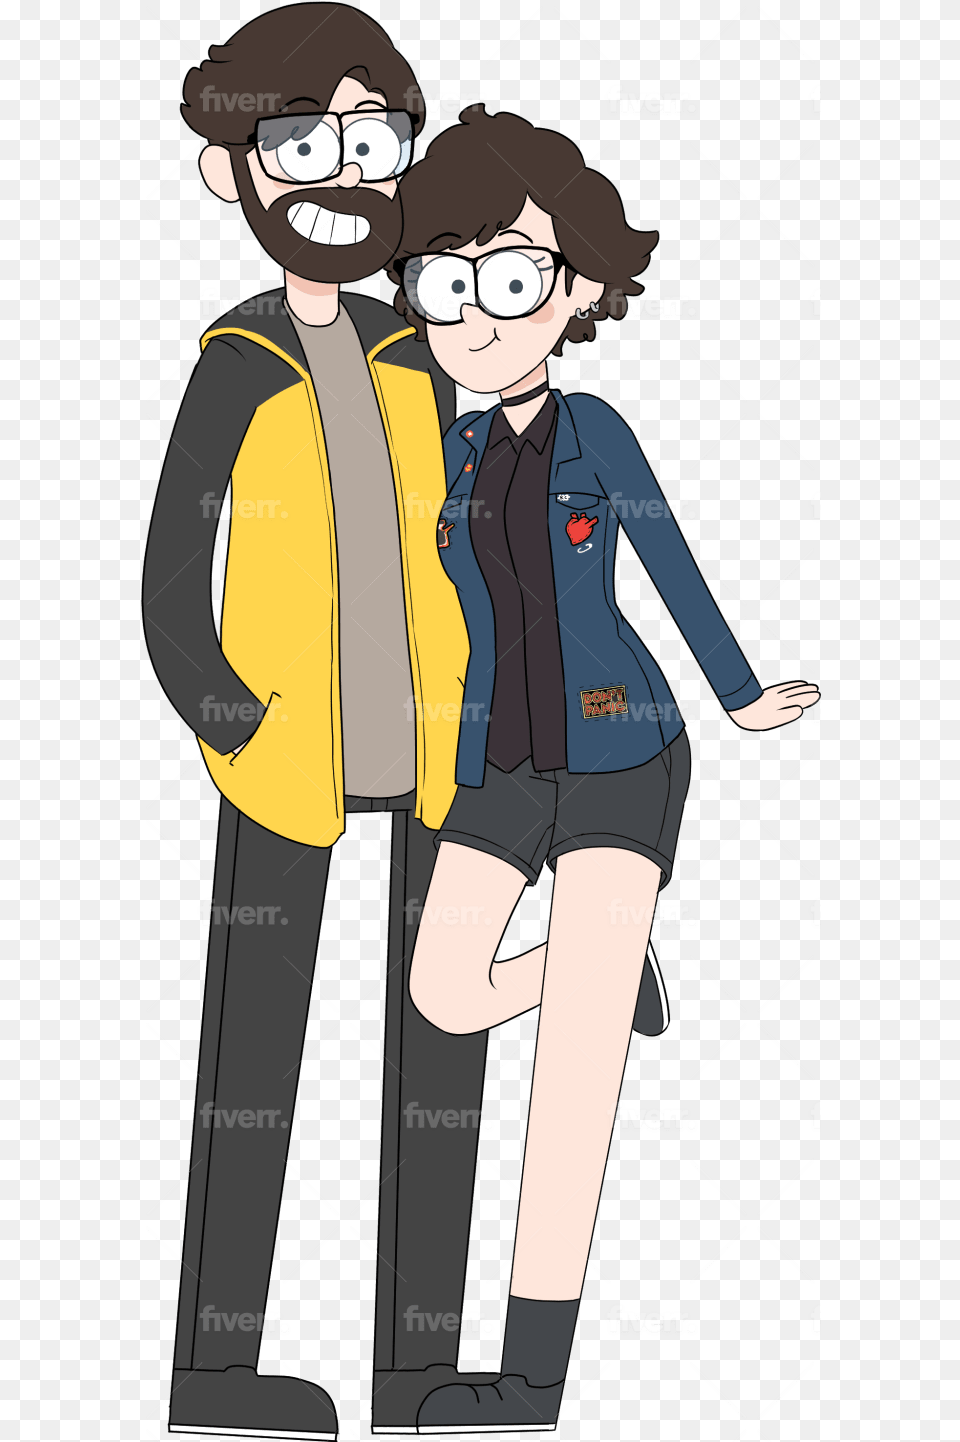 Draw You In Gravity Falls Cartoon Style Fictional Character, Publication, Book, Clothing, Coat Png Image